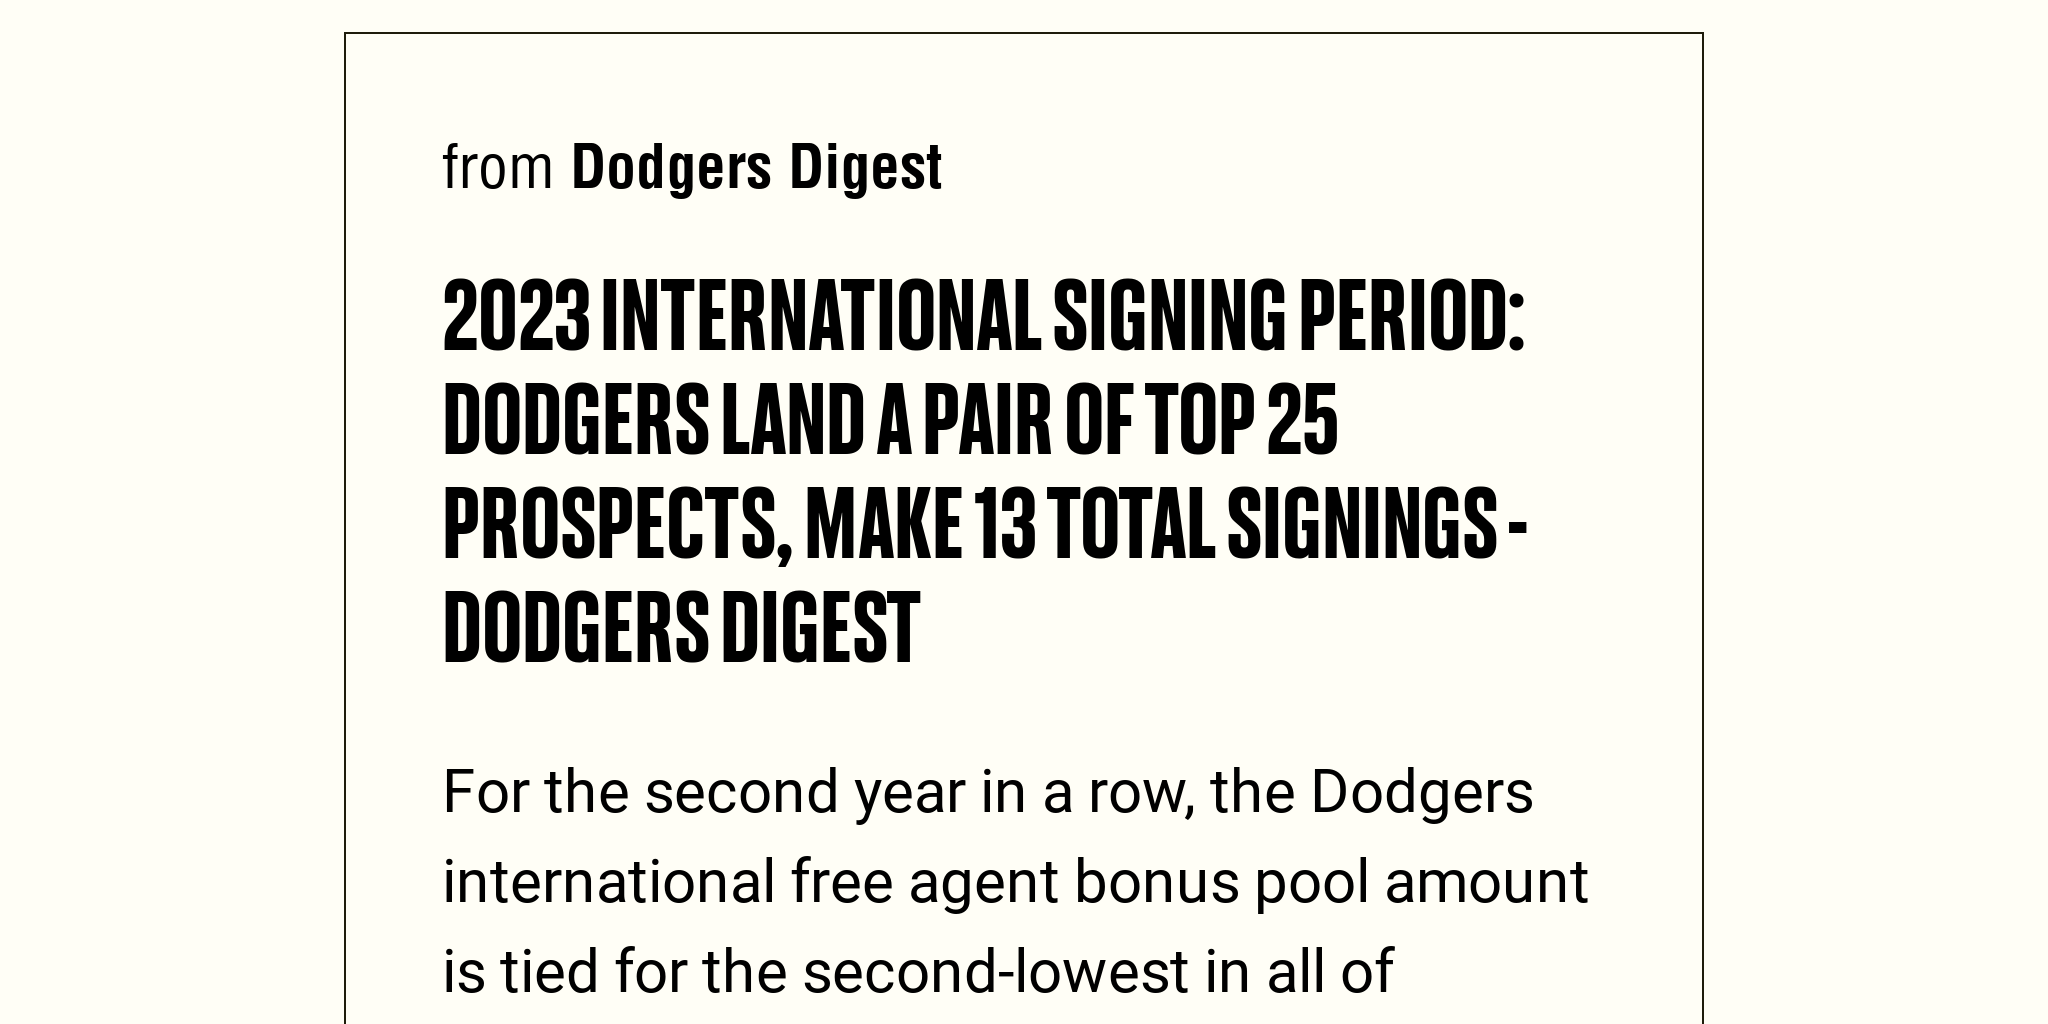 2023 International Signing Period Dodgers land a pair of Top 25